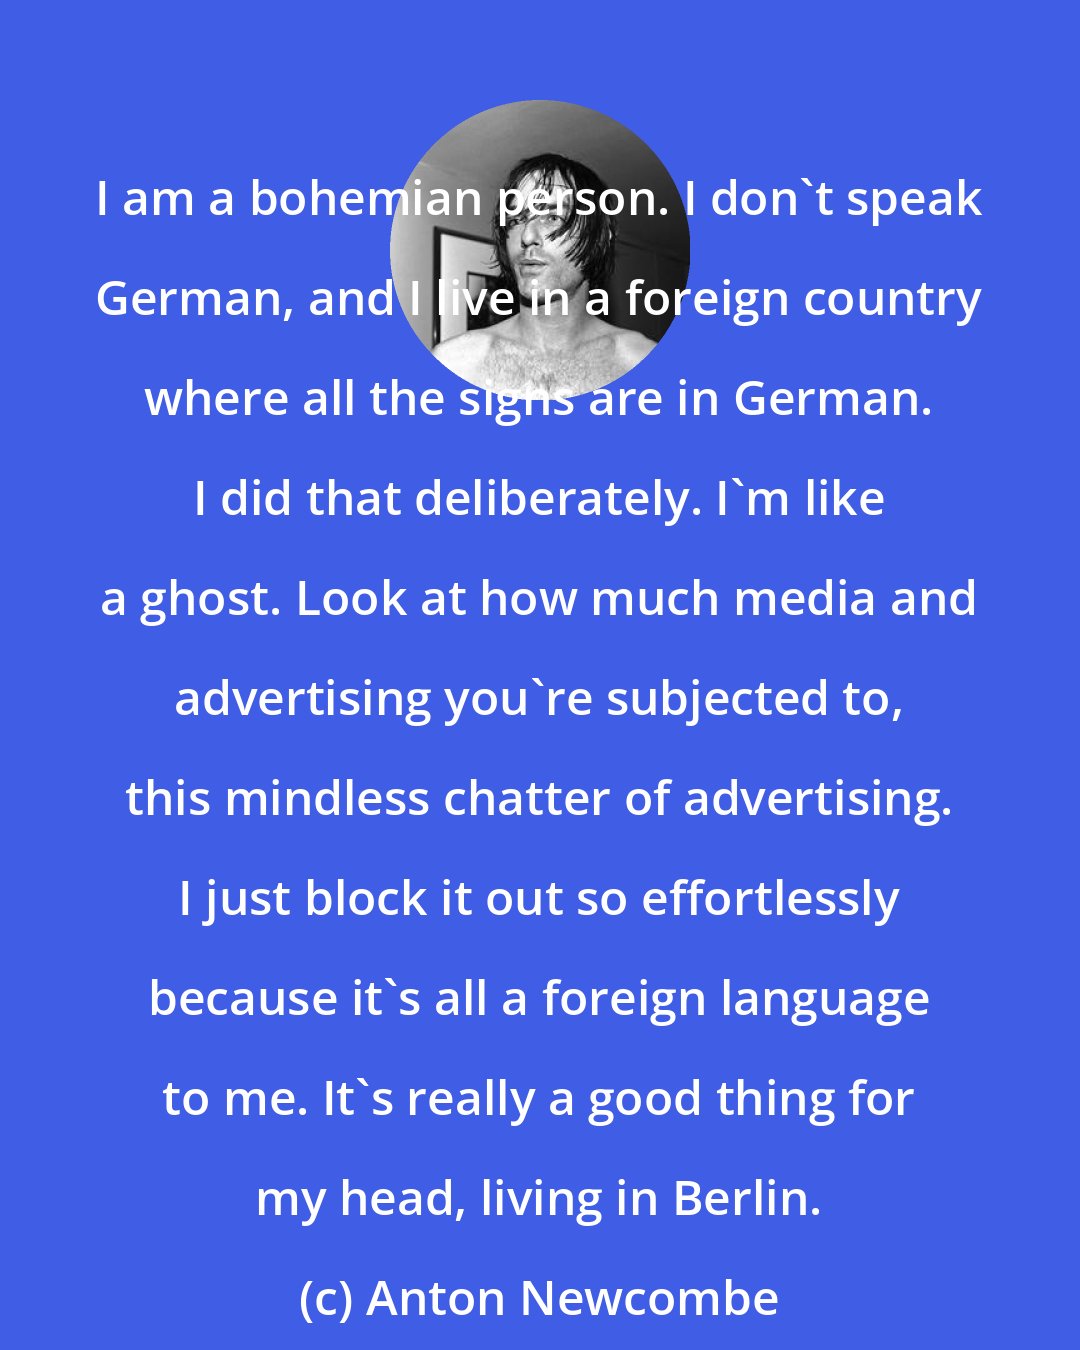 Anton Newcombe: I am a bohemian person. I don't speak German, and I live in a foreign country where all the signs are in German. I did that deliberately. I'm like a ghost. Look at how much media and advertising you're subjected to, this mindless chatter of advertising. I just block it out so effortlessly because it's all a foreign language to me. It's really a good thing for my head, living in Berlin.